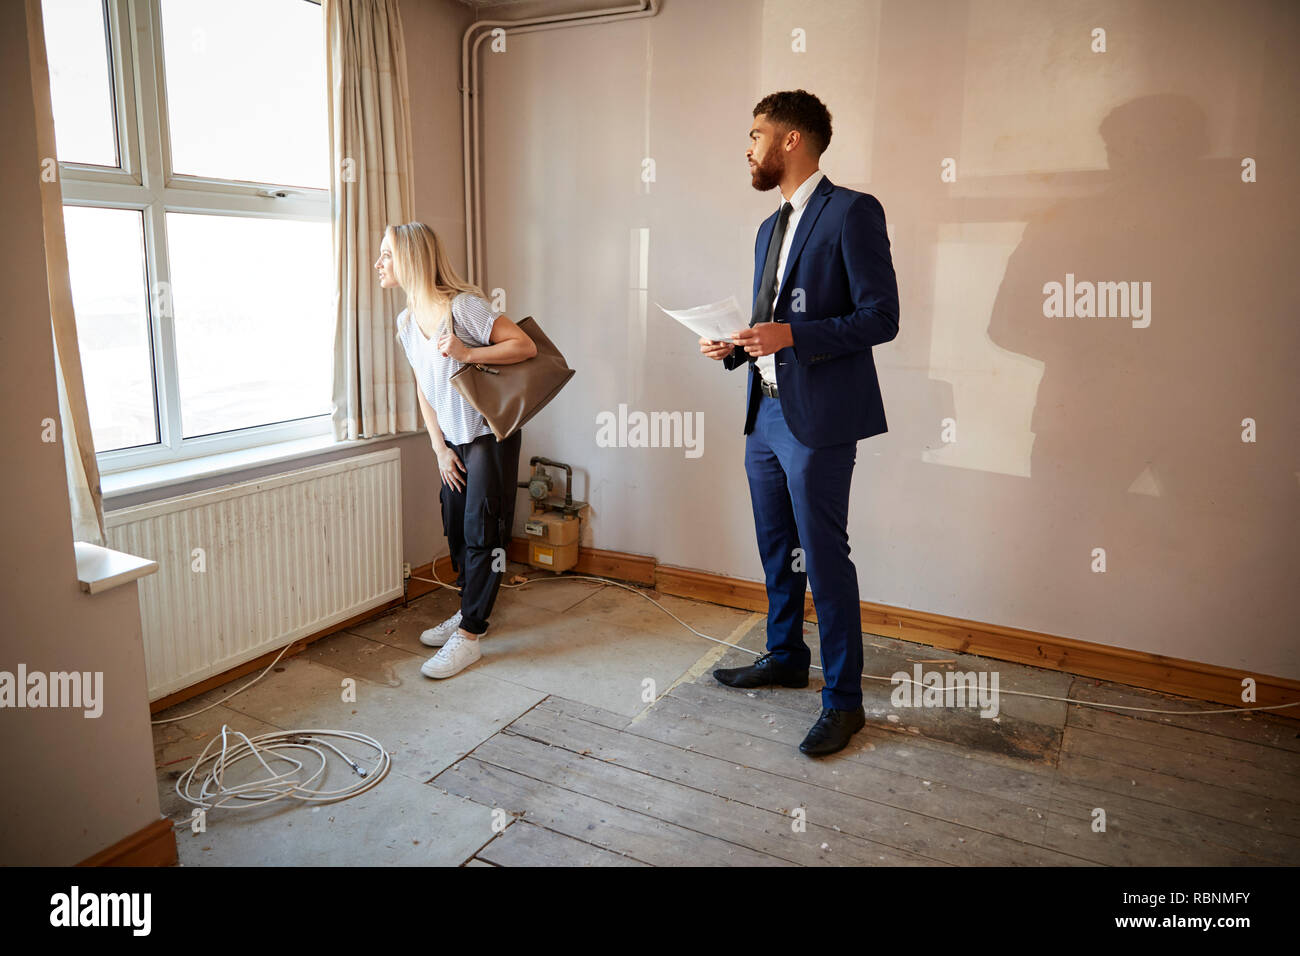 Female First Time Buyer Looking At House Survey With Realtor Stock Photo